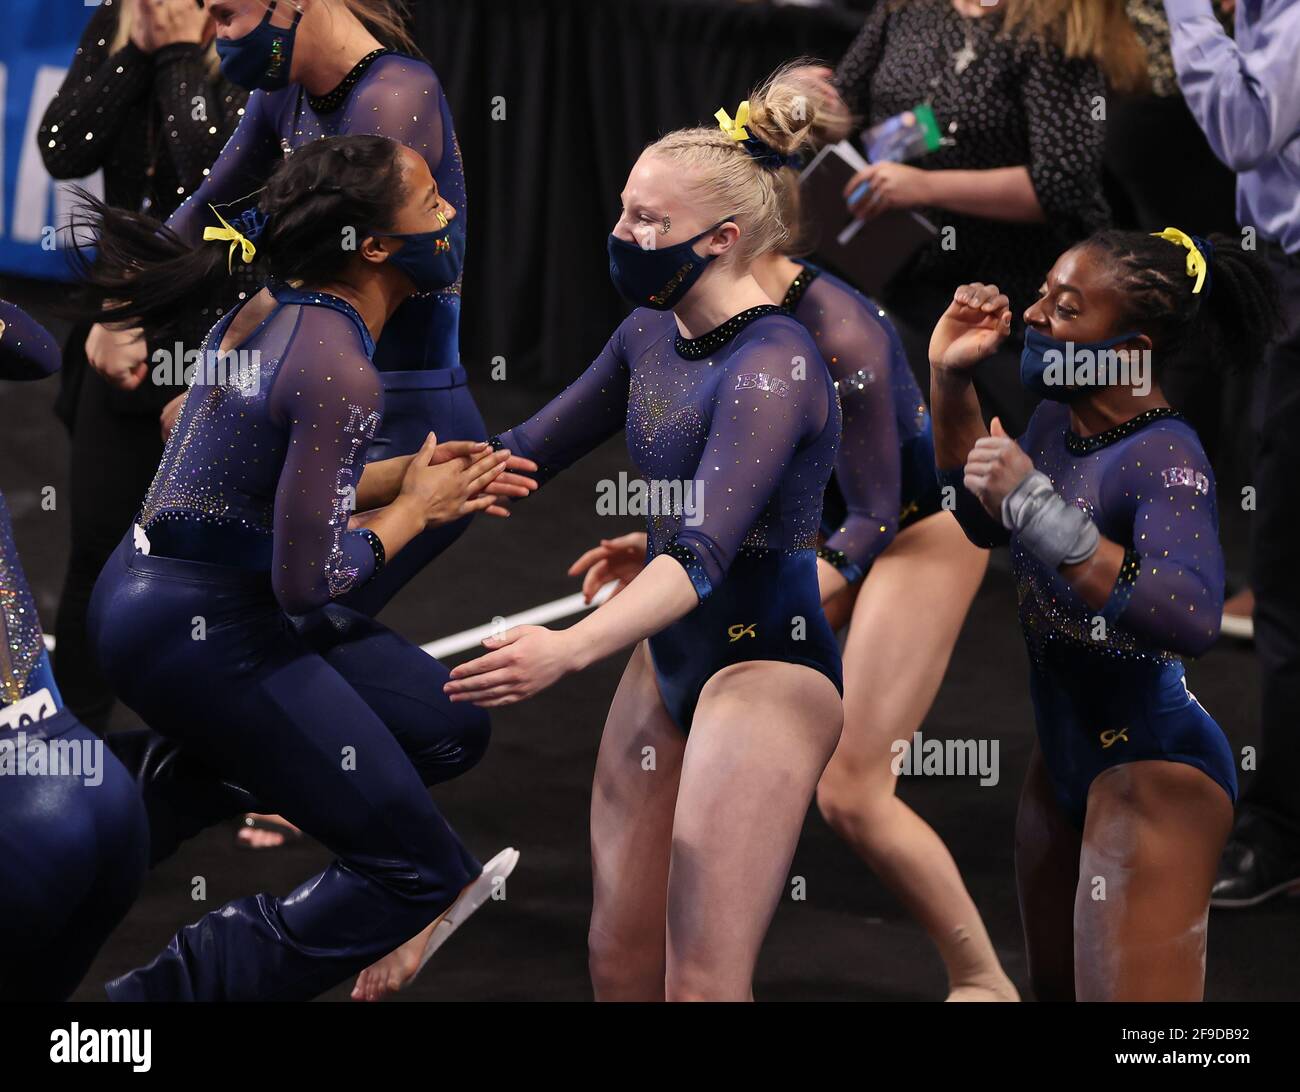 Fort Worth, TX, USA. 17th Apr, 2021. Michigan gymnasts celebrate as they're announced as the national champions during the Finals of the 2021 NCAA Women's National Collegiate Gymnastics Championship at Dickies Arena in Fort Worth, TX. Kyle Okita/CSM/Alamy Live News Stock Photo